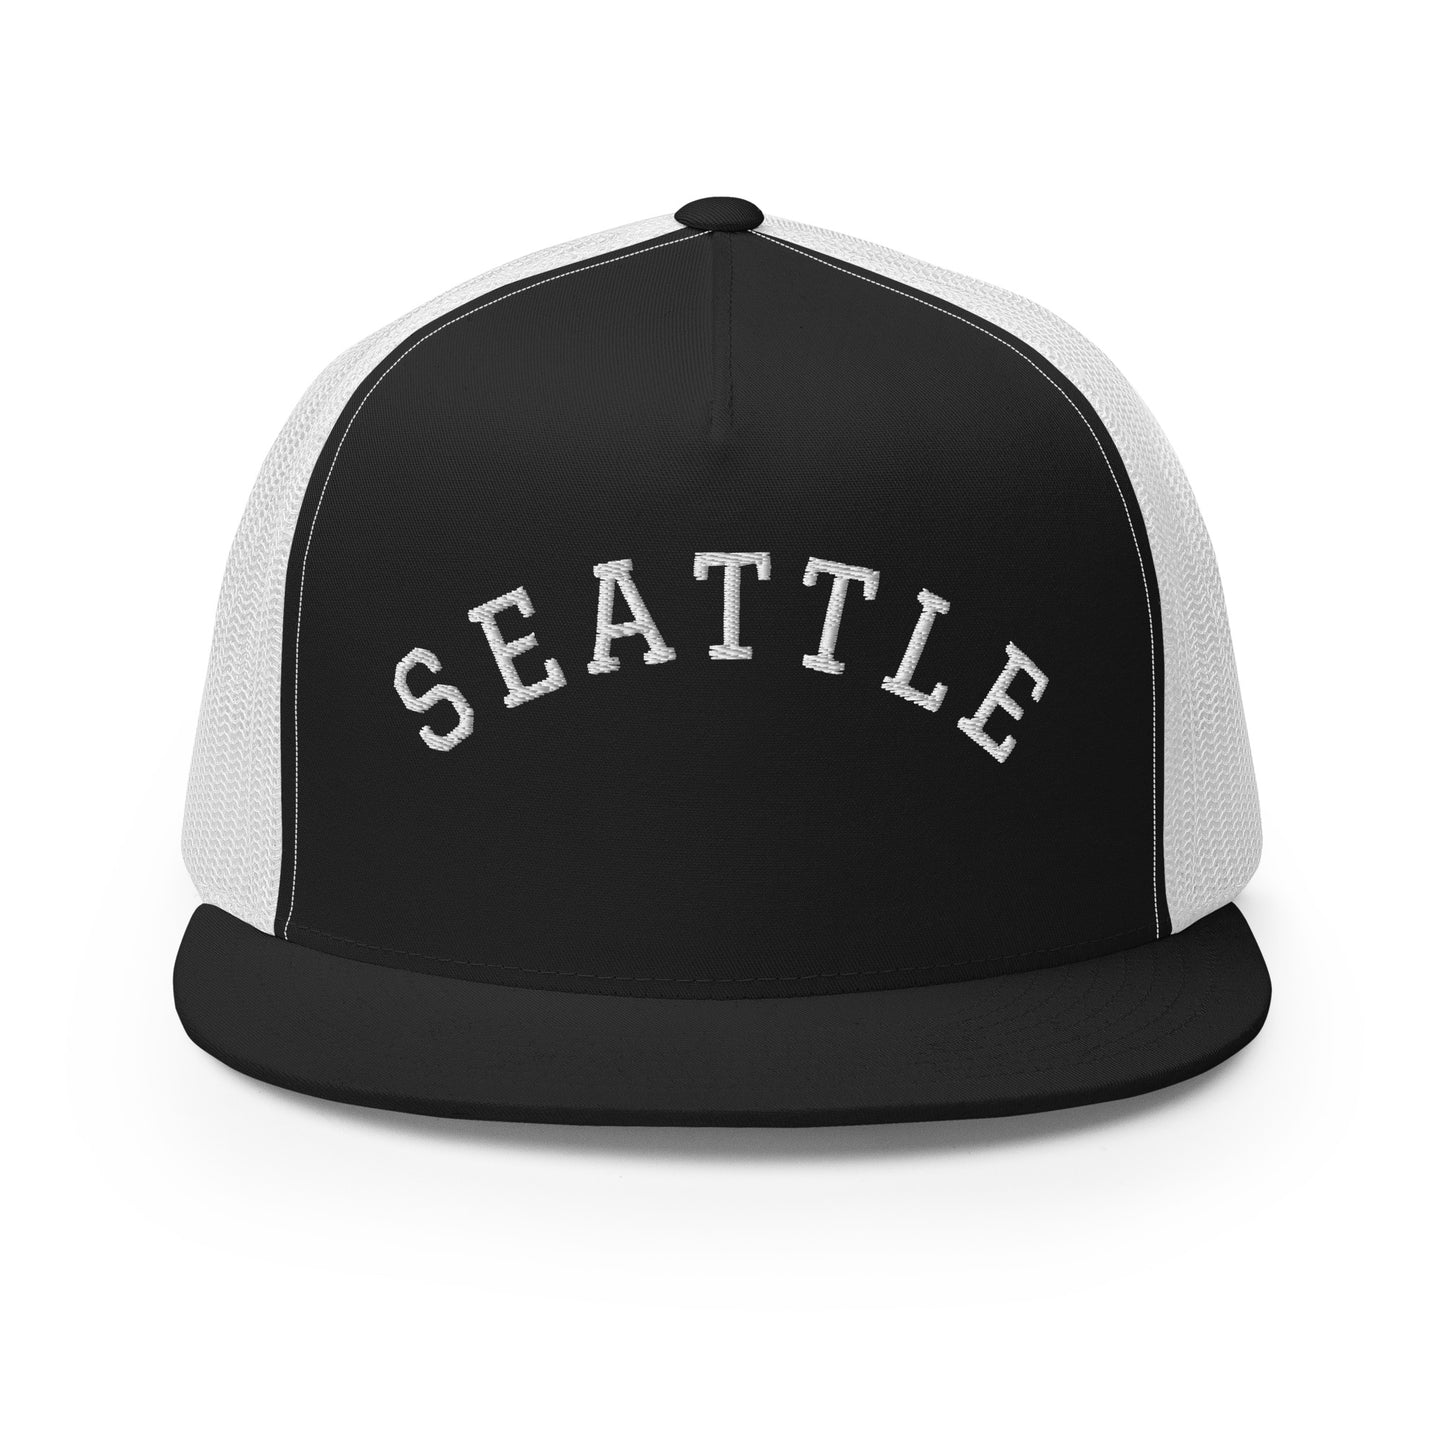 Seattle Arch High 5 Panel A-Frame Snapback Trucker Hat